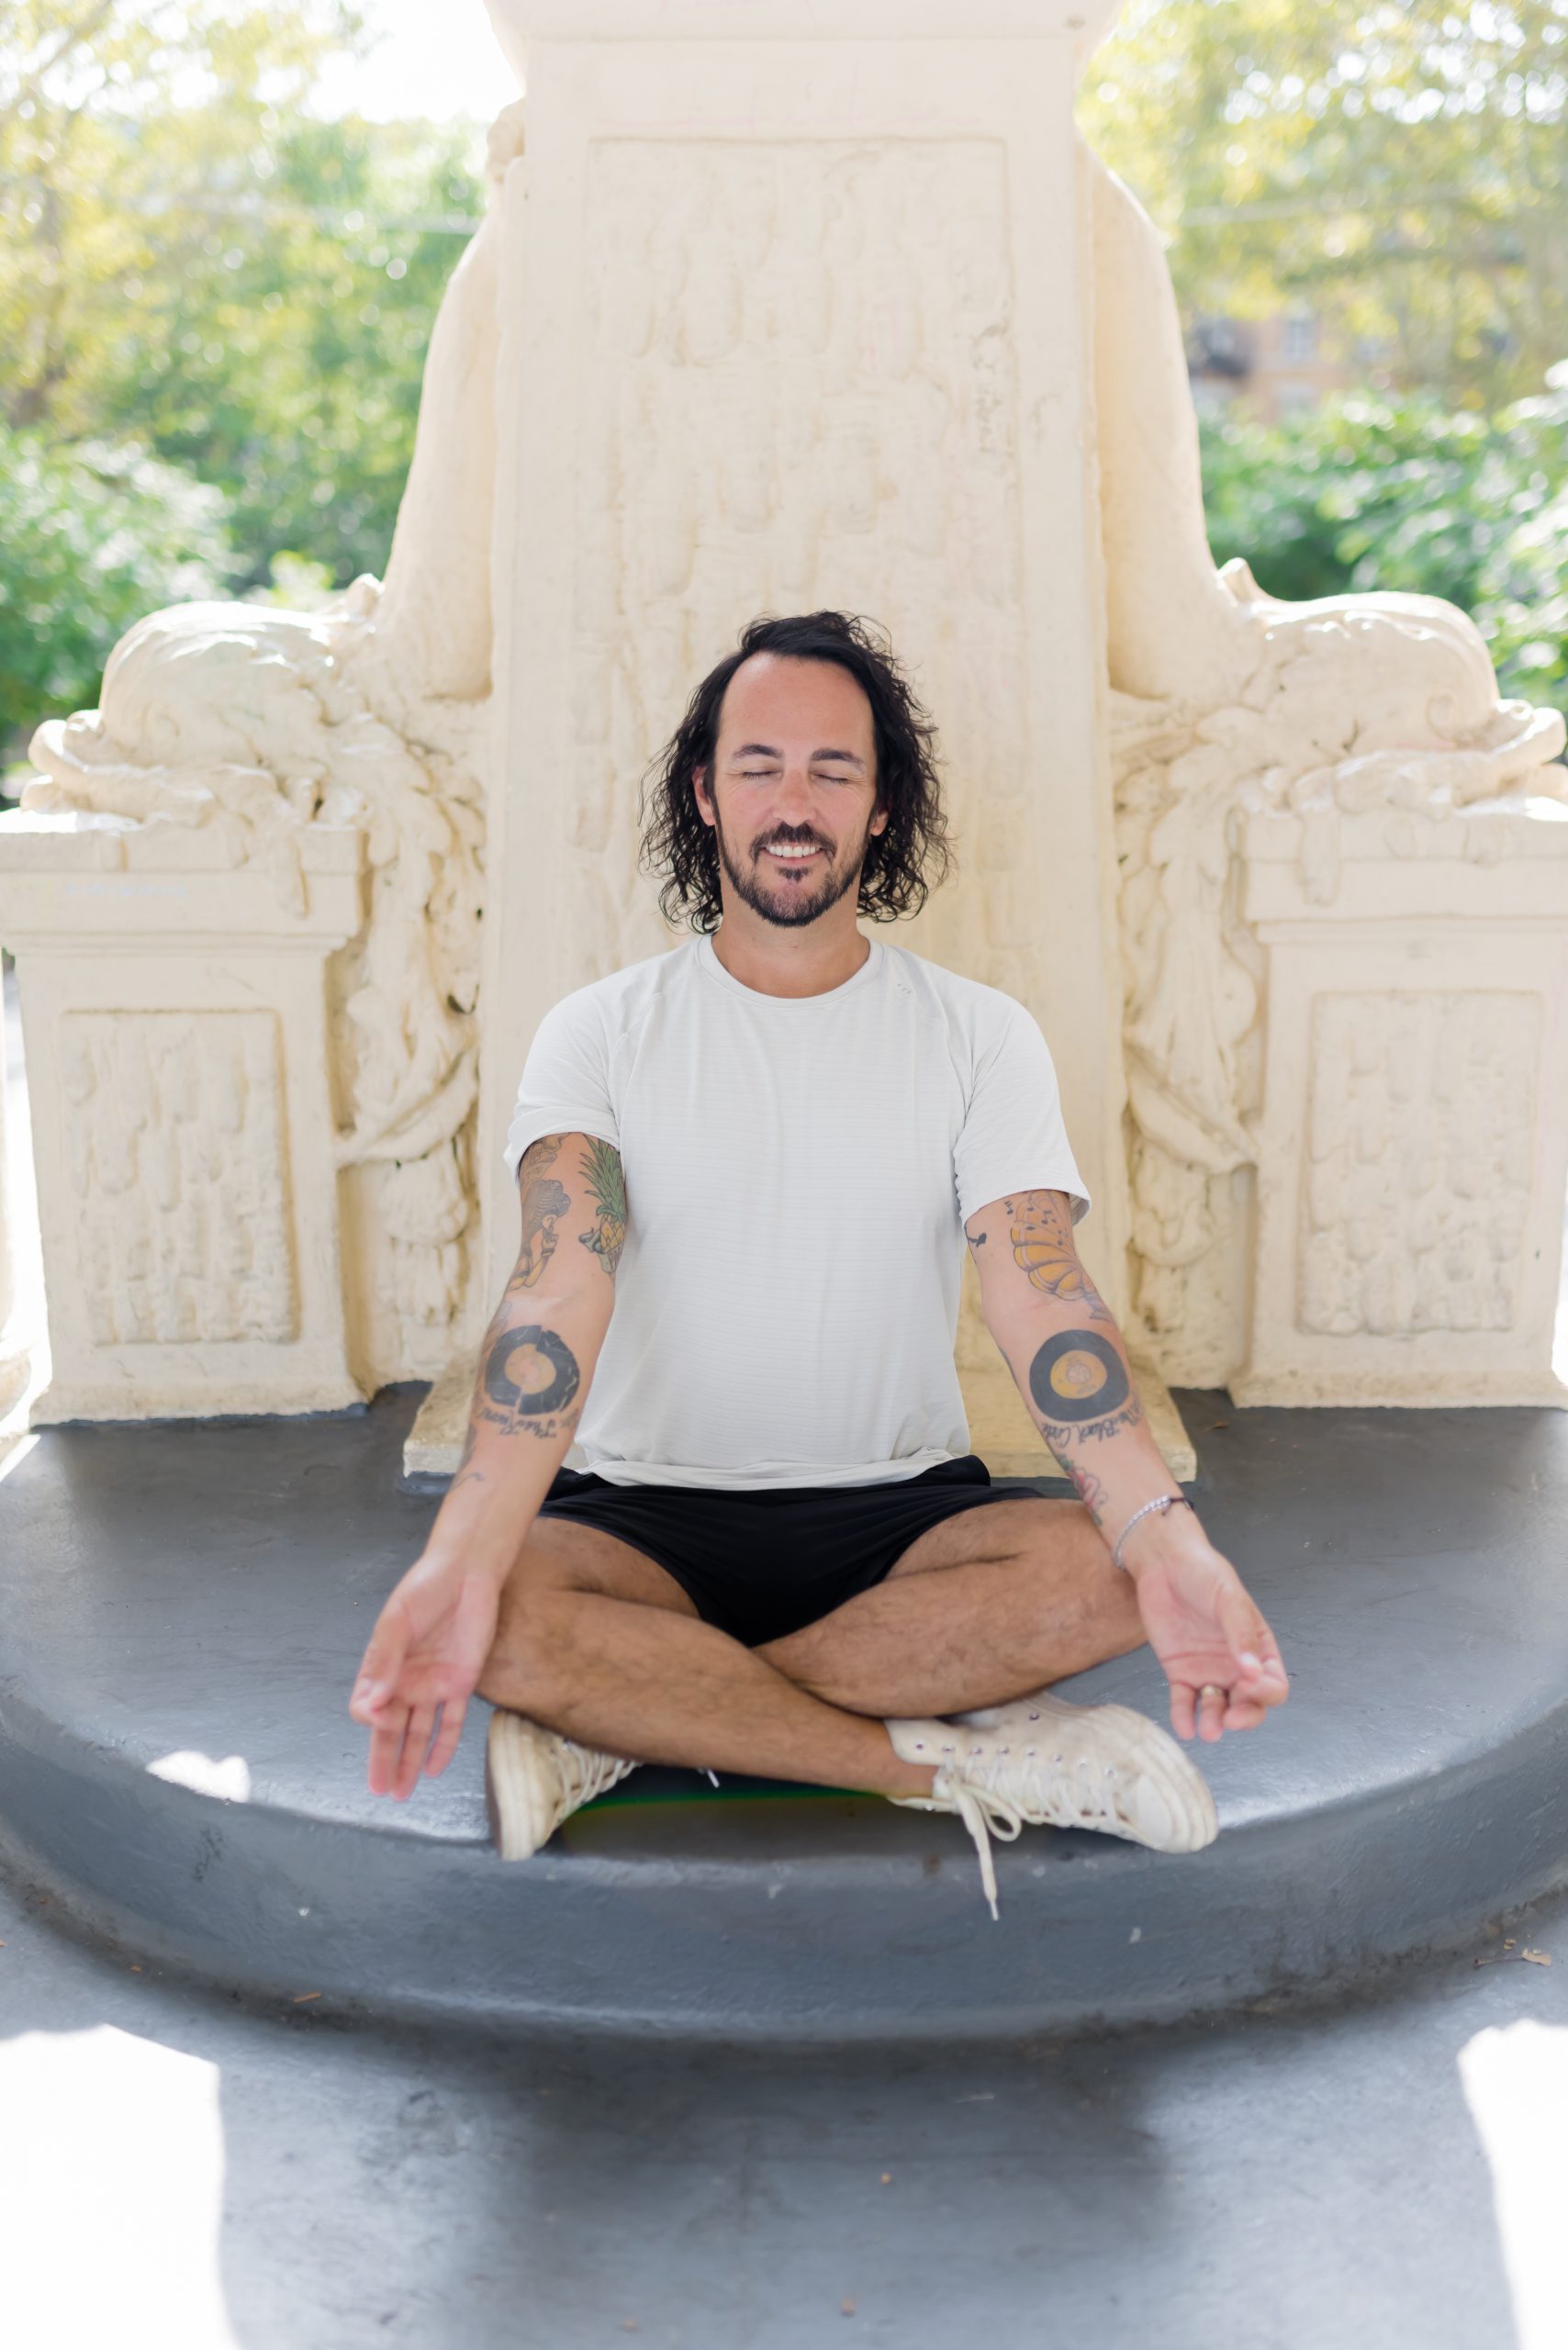 Patrick Franco of YogaRenew sitting in sukhasana in front of a beautiful ivory, stone sculpture in Hoboken, NJ